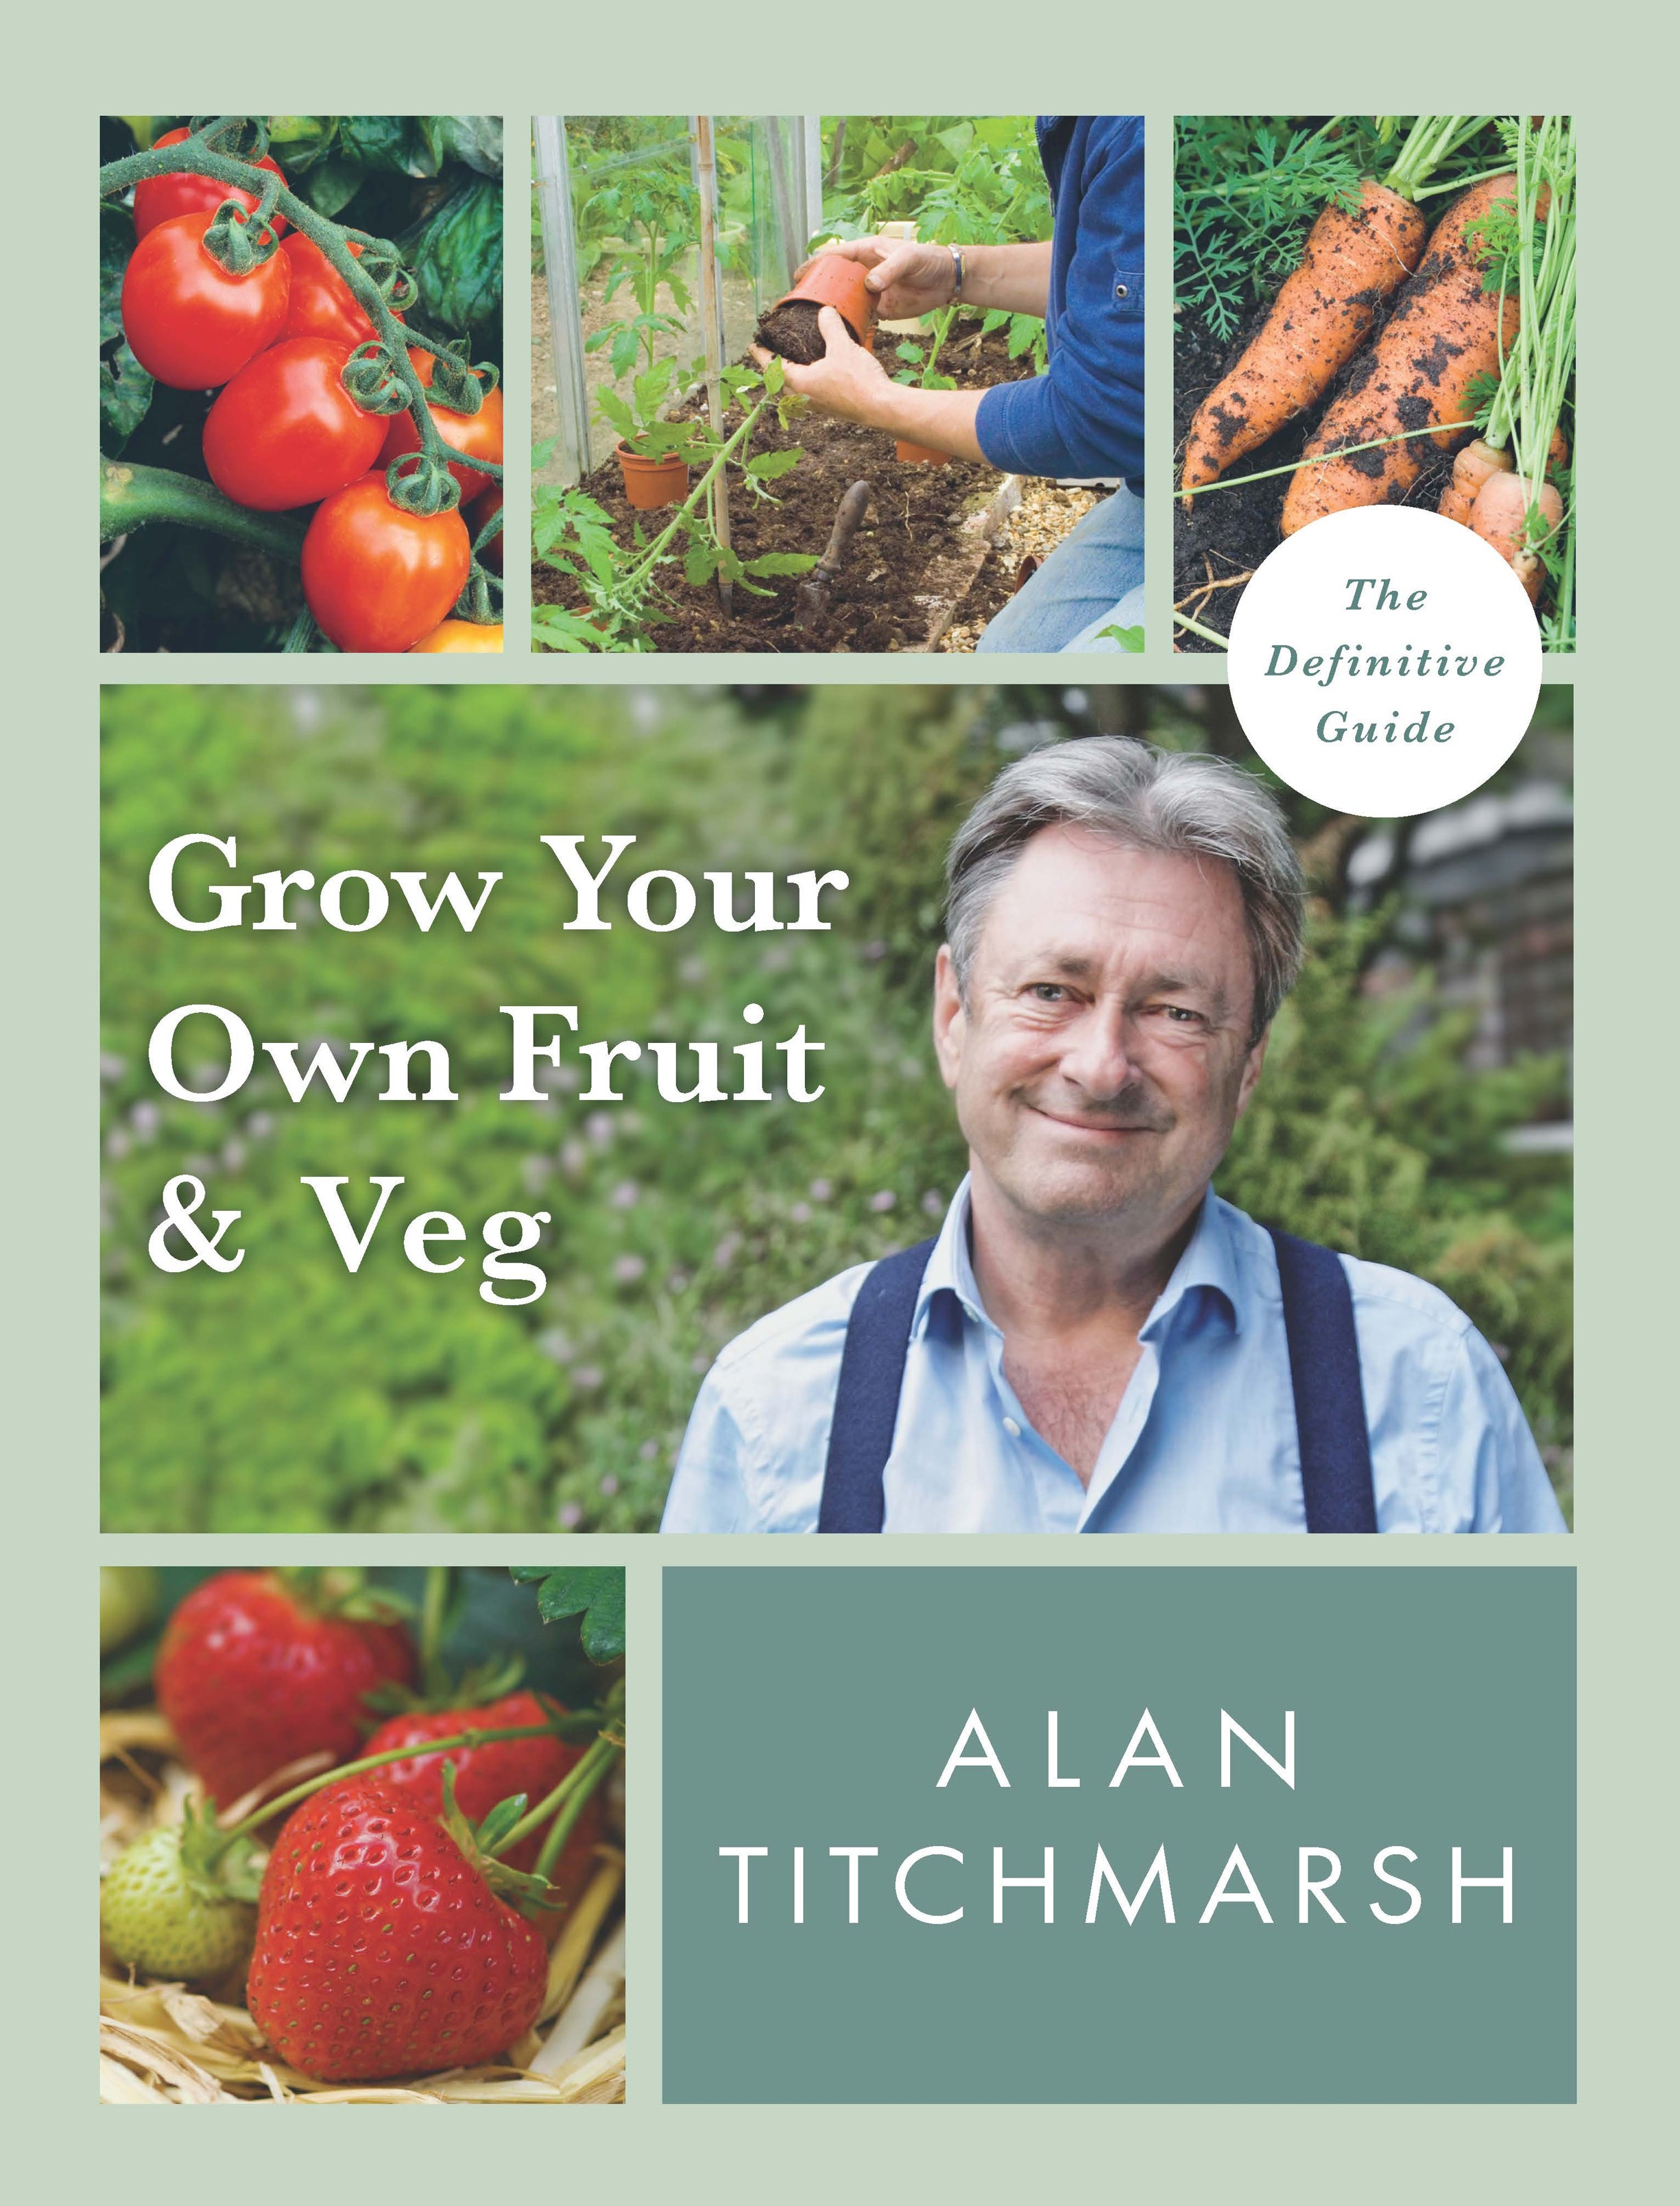 Grow Your Own Fruit & Veg by Alan Titchmarsh (BBC Books/PA)